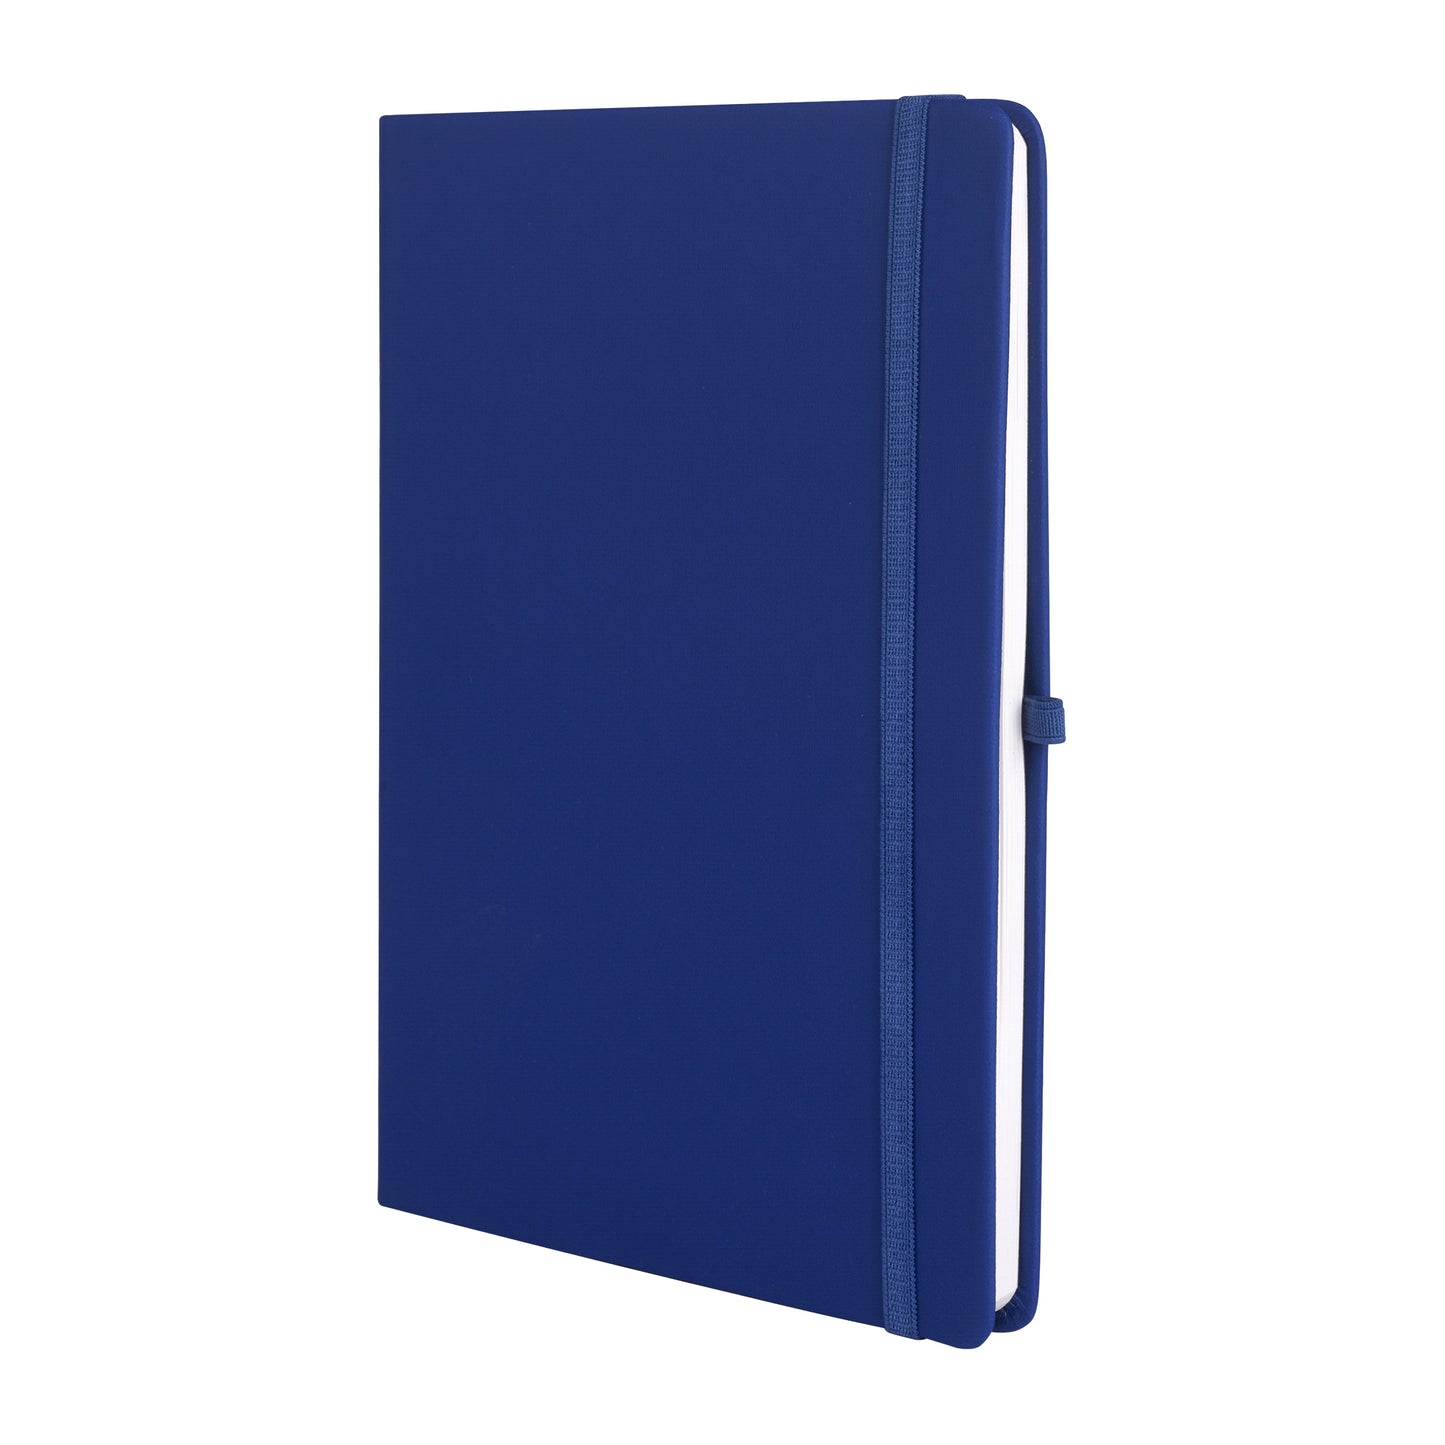 Navy Blue Color 3in1 Combo Gift Set Notebook Diary, Pen, and Bottle - For Employee Joining Kit, Corporate, Client or Dealer Gifting HK68